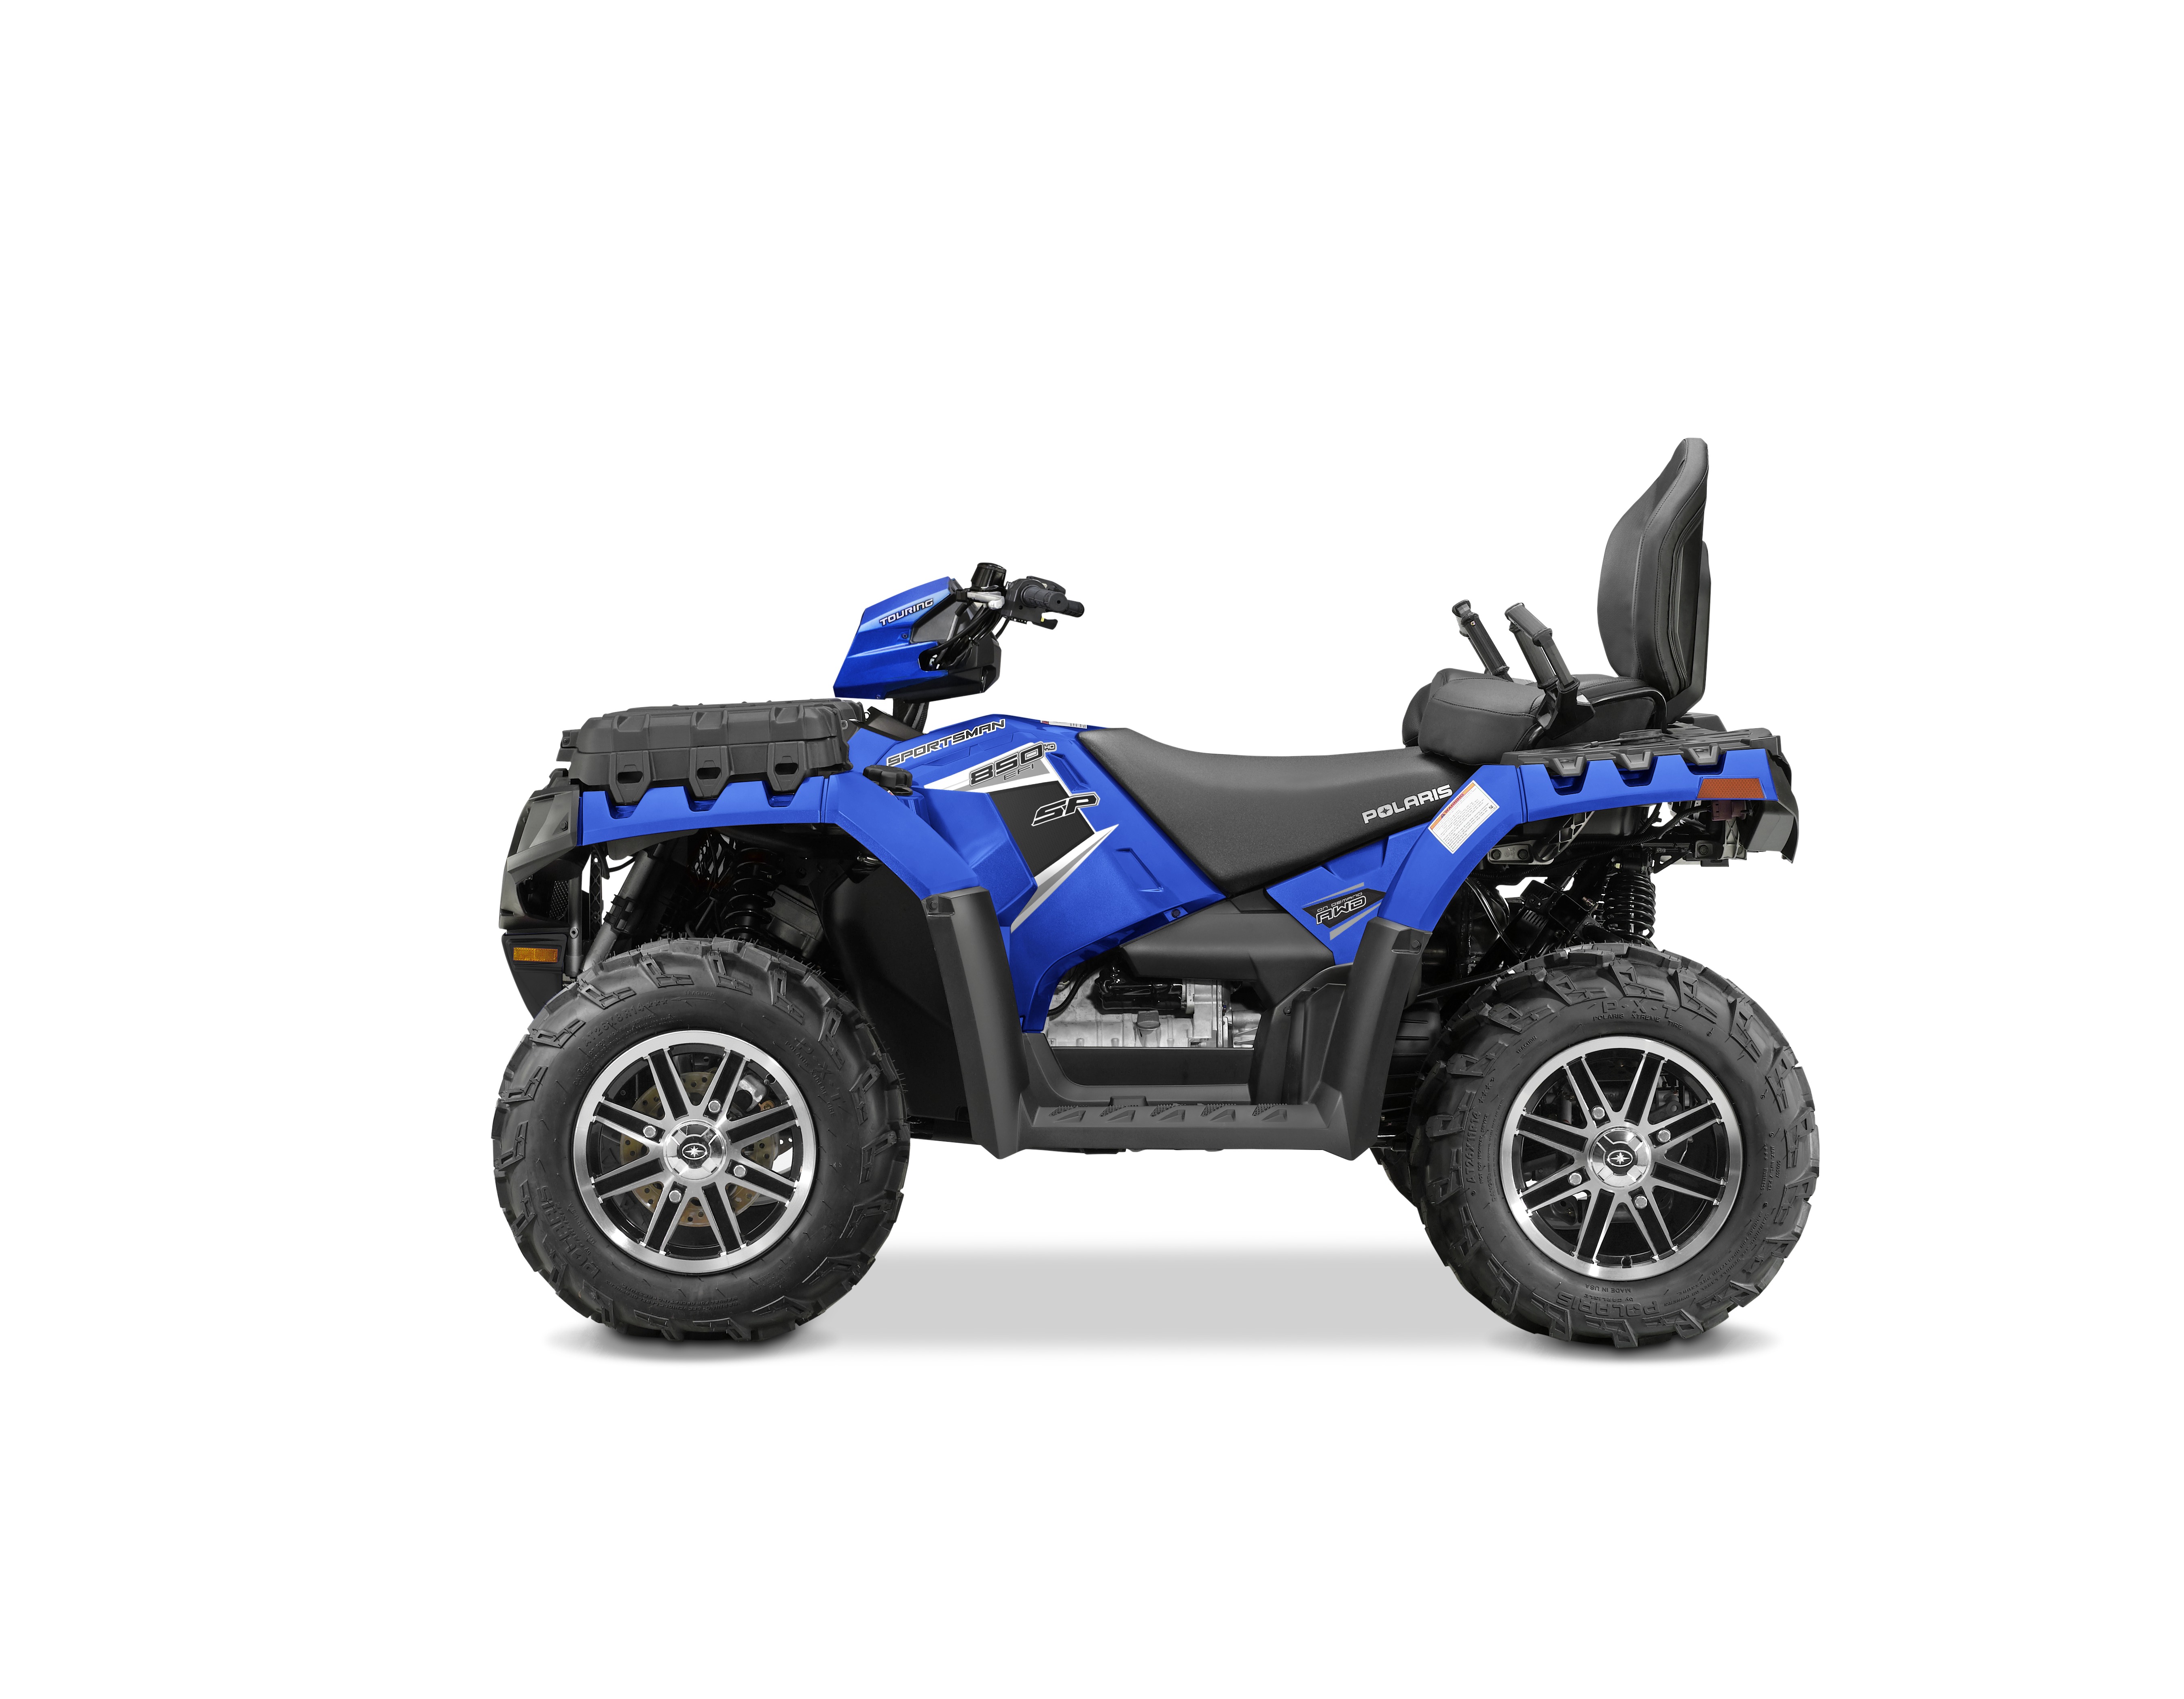 Sportsman 850 and 1000 all-terrain vehicles (ATVs)